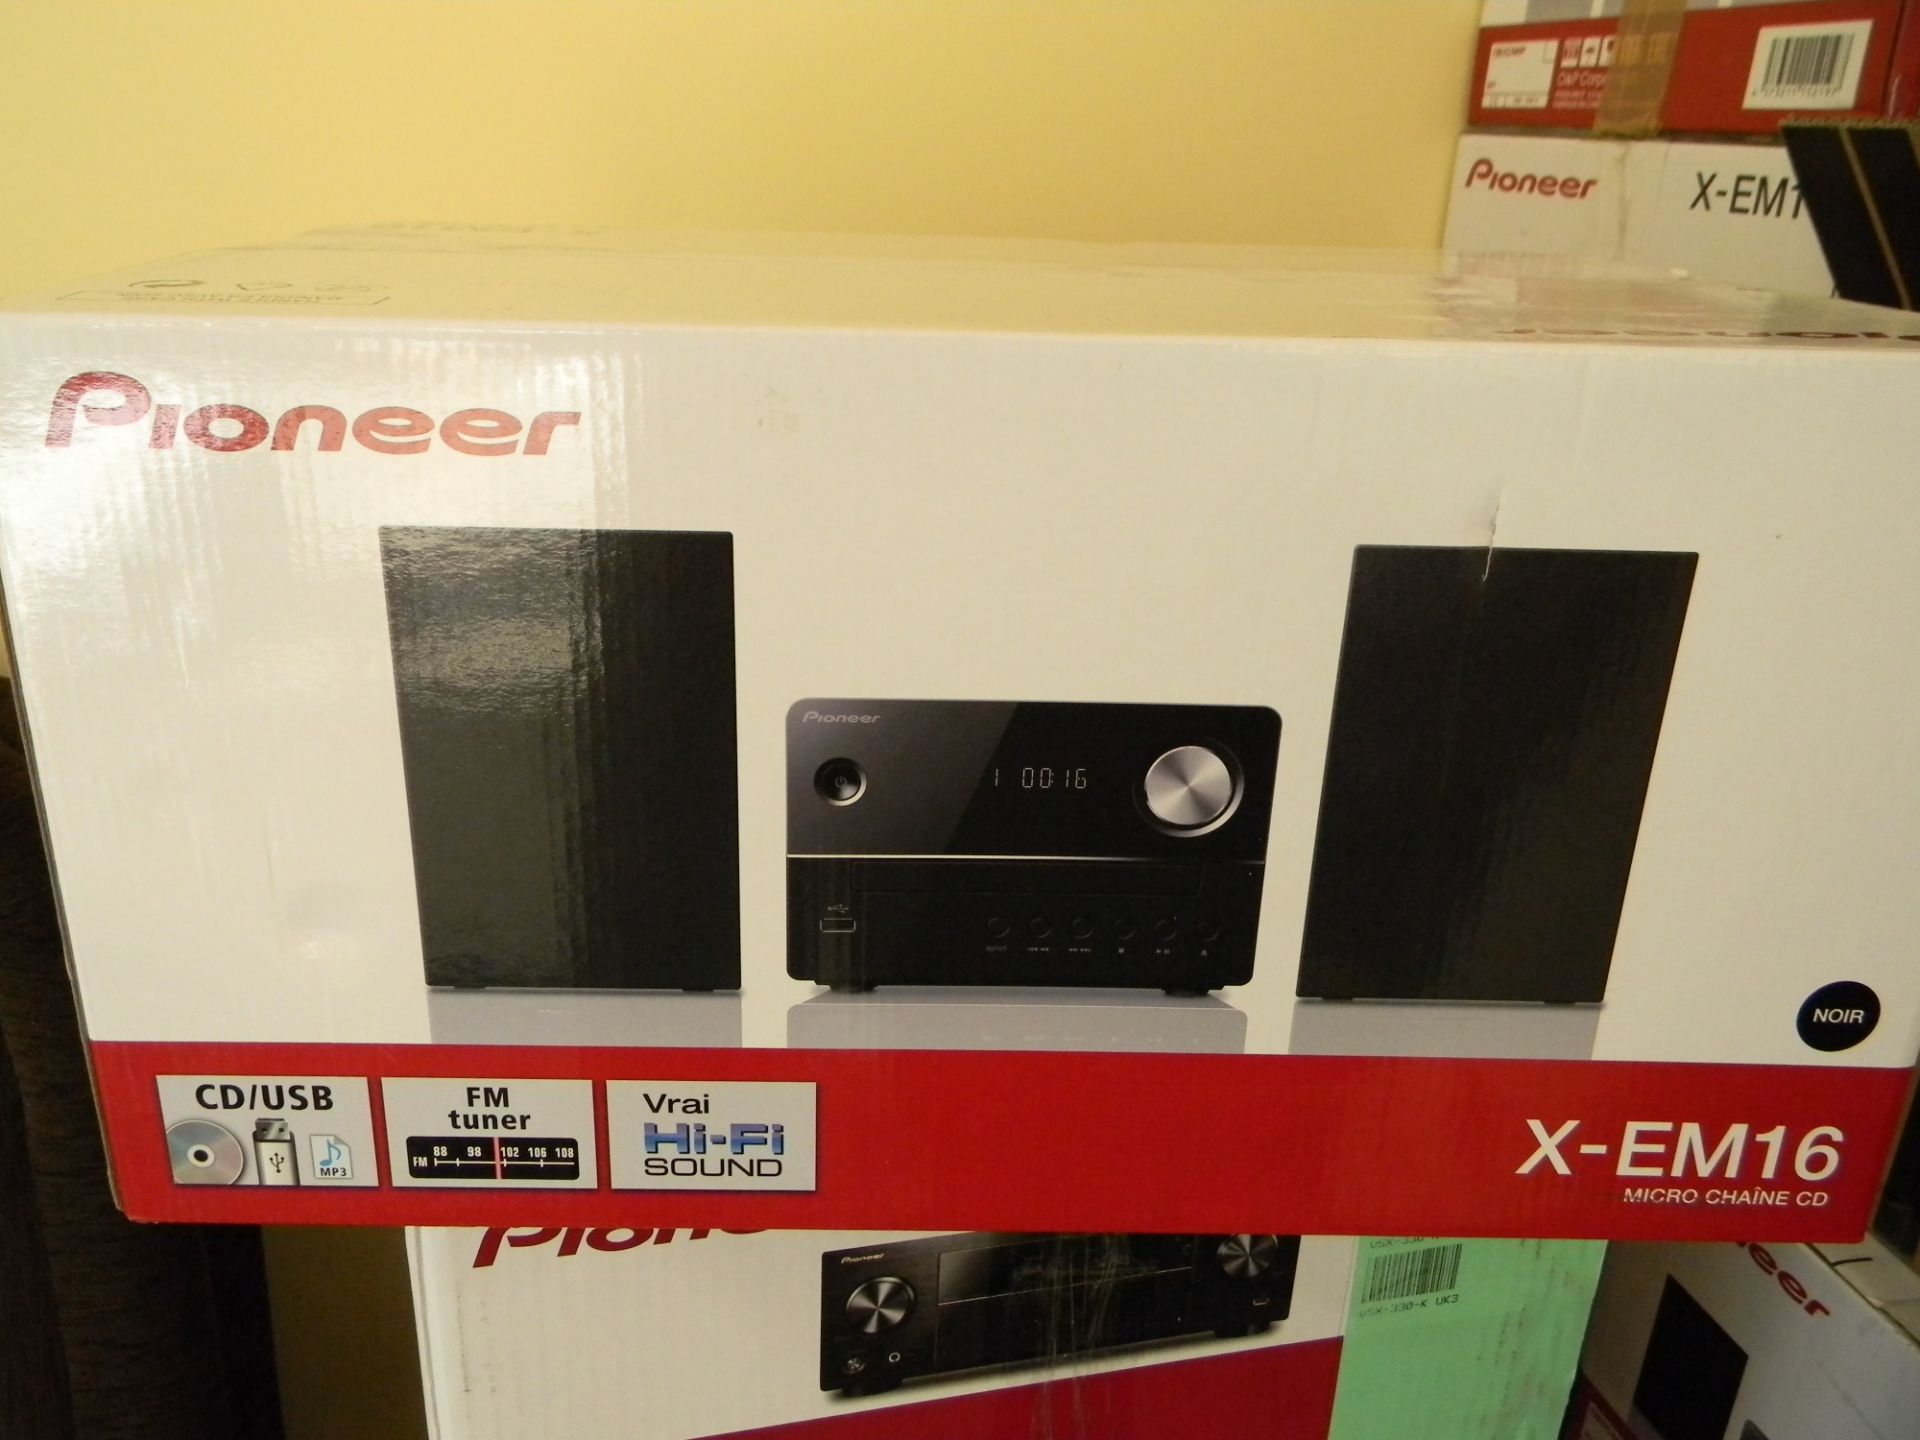 10 x Pioneer X-EM 16 Compact Radio CD with USB System - Image 3 of 3